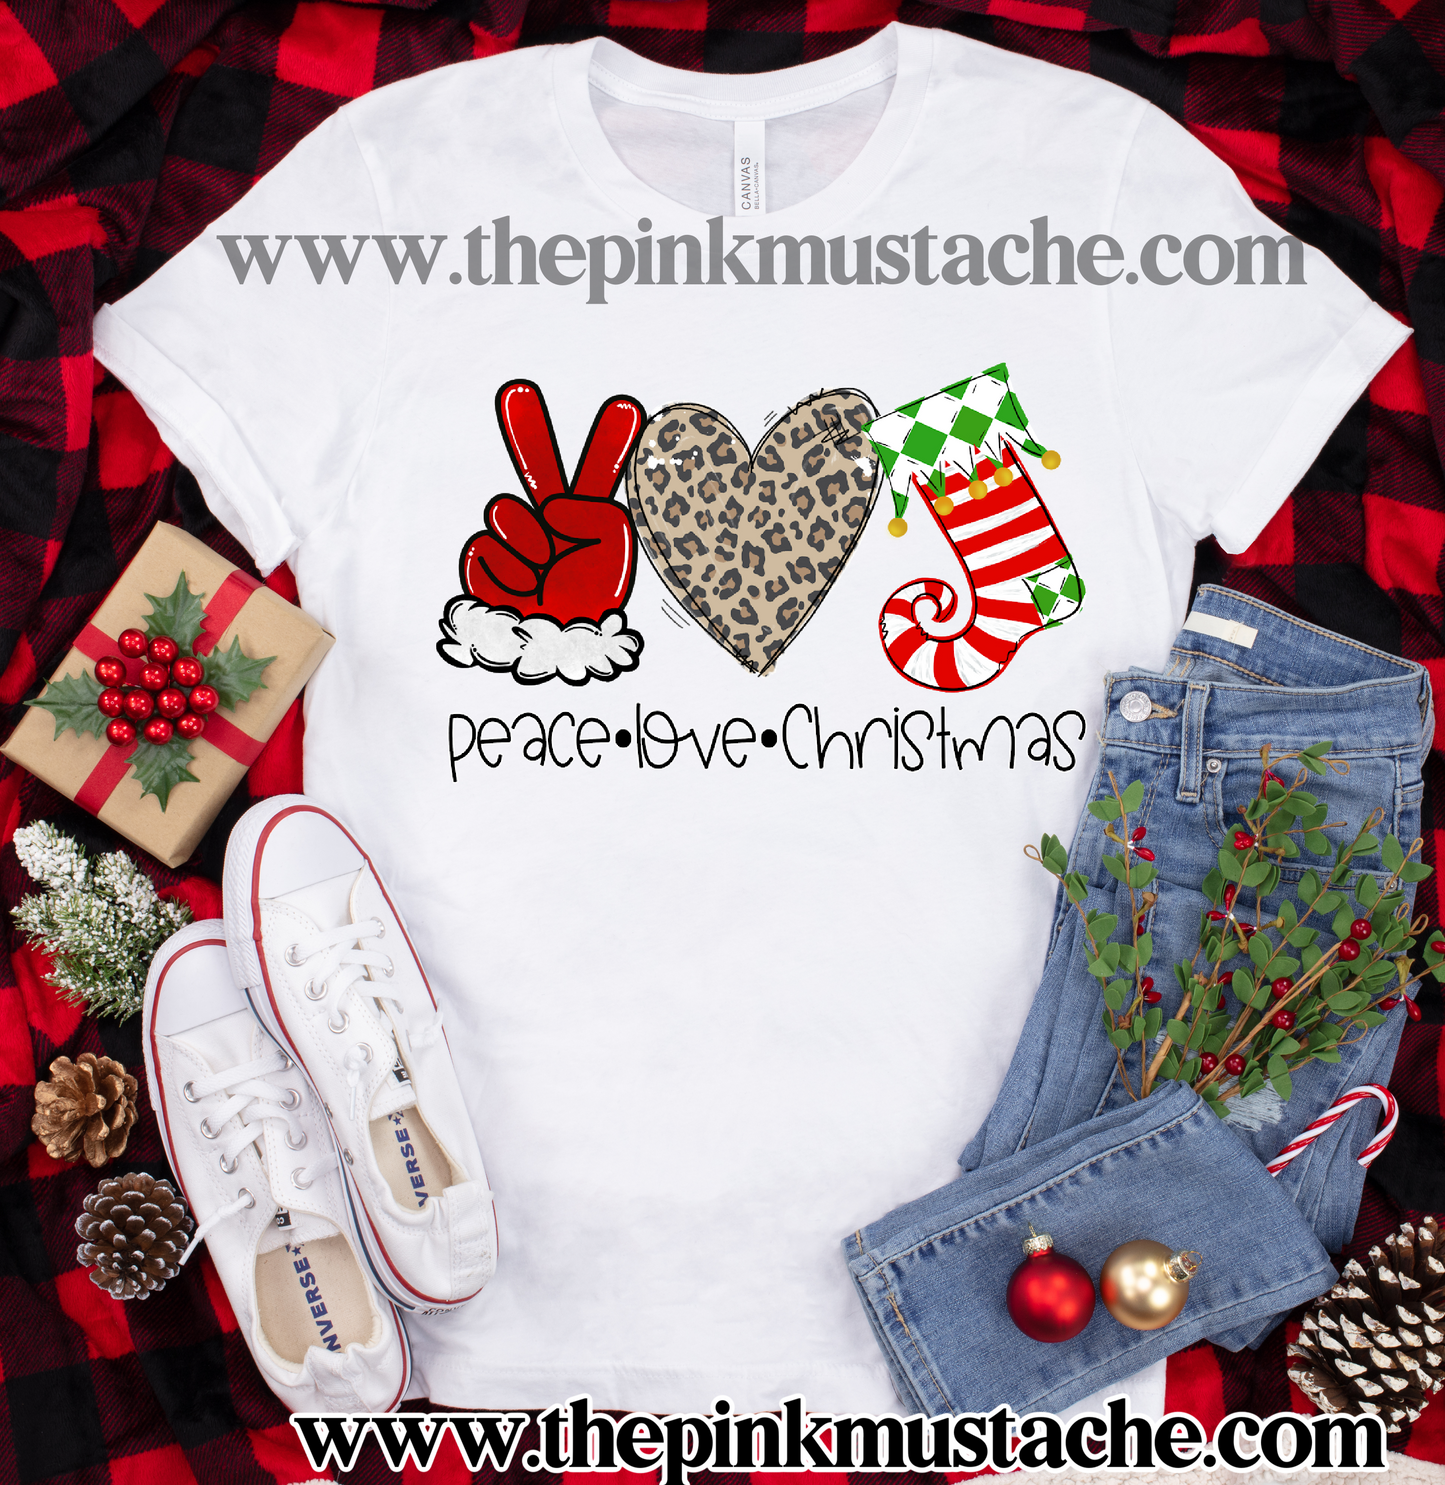 Peace Love Christmas Tee / Merry Christmas T-Shirt / Youth and Adult sizing